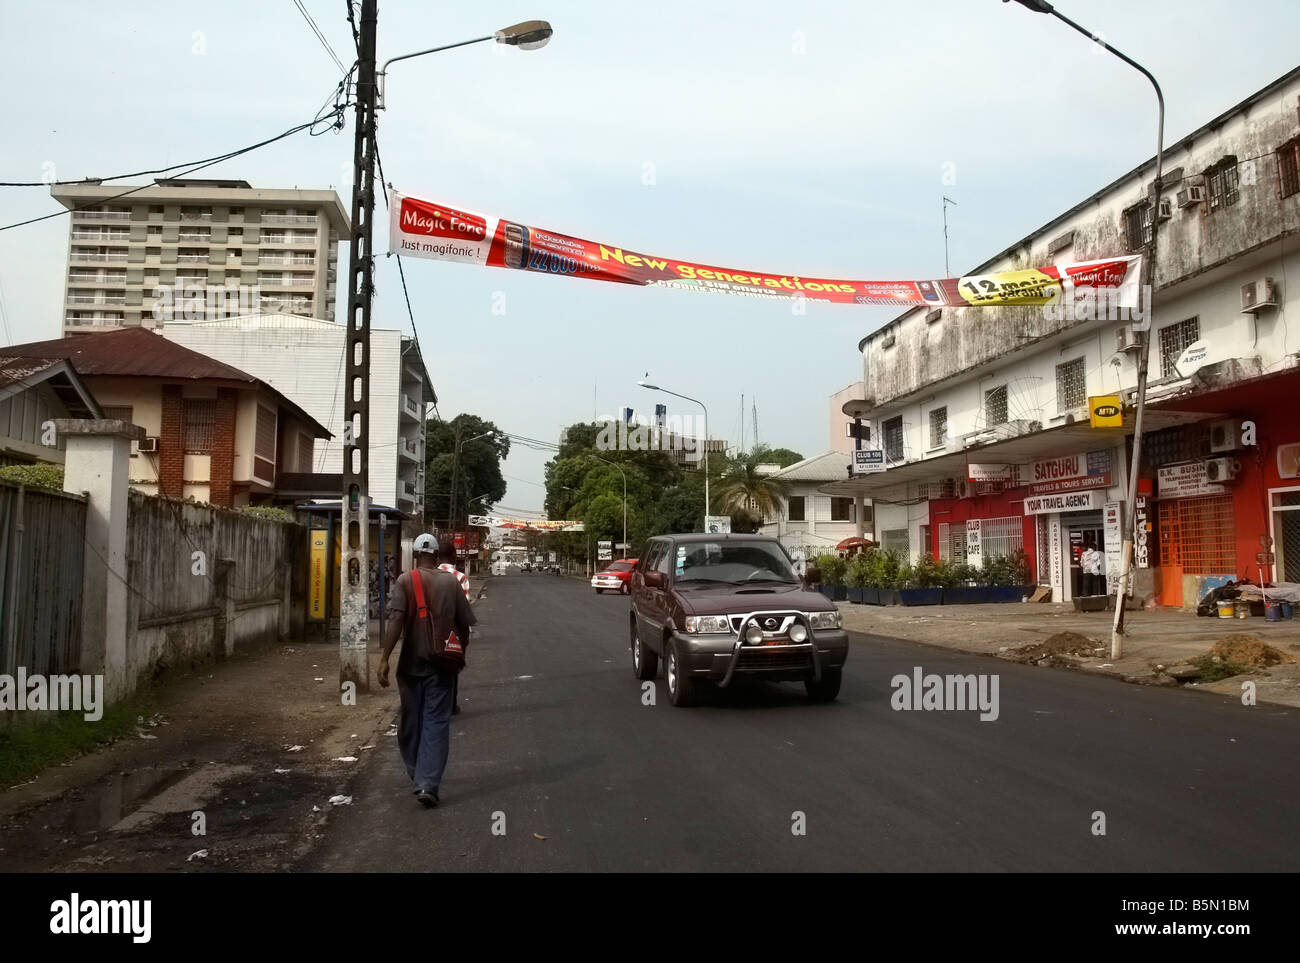 Street scene with advertising banner Bonanjo district Douala Cameroon West Africa Stock Photo